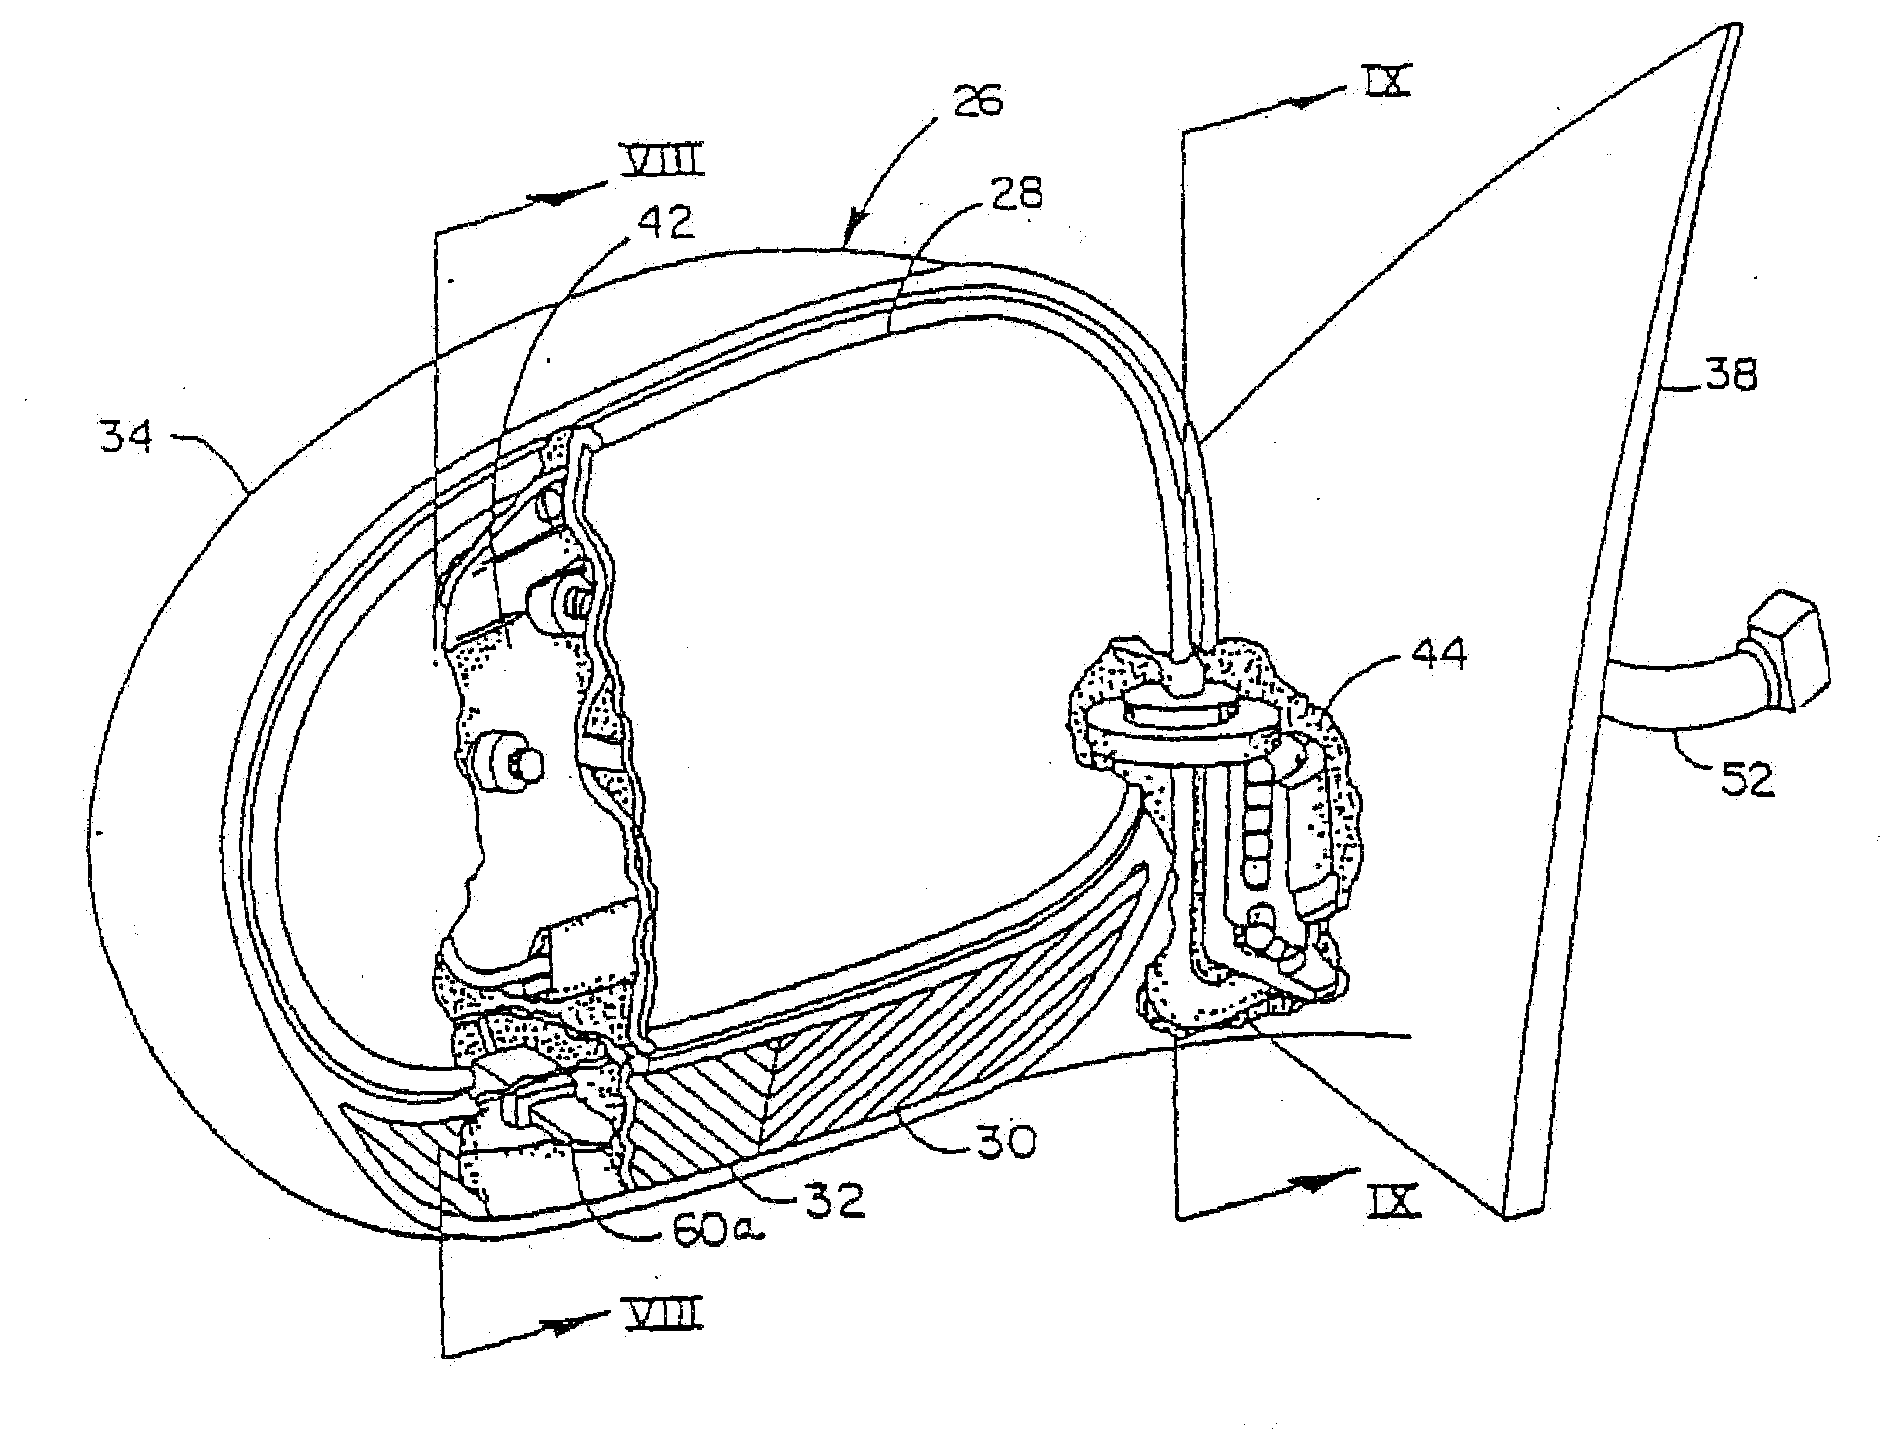 Exterior mirror vision system for a vehicle